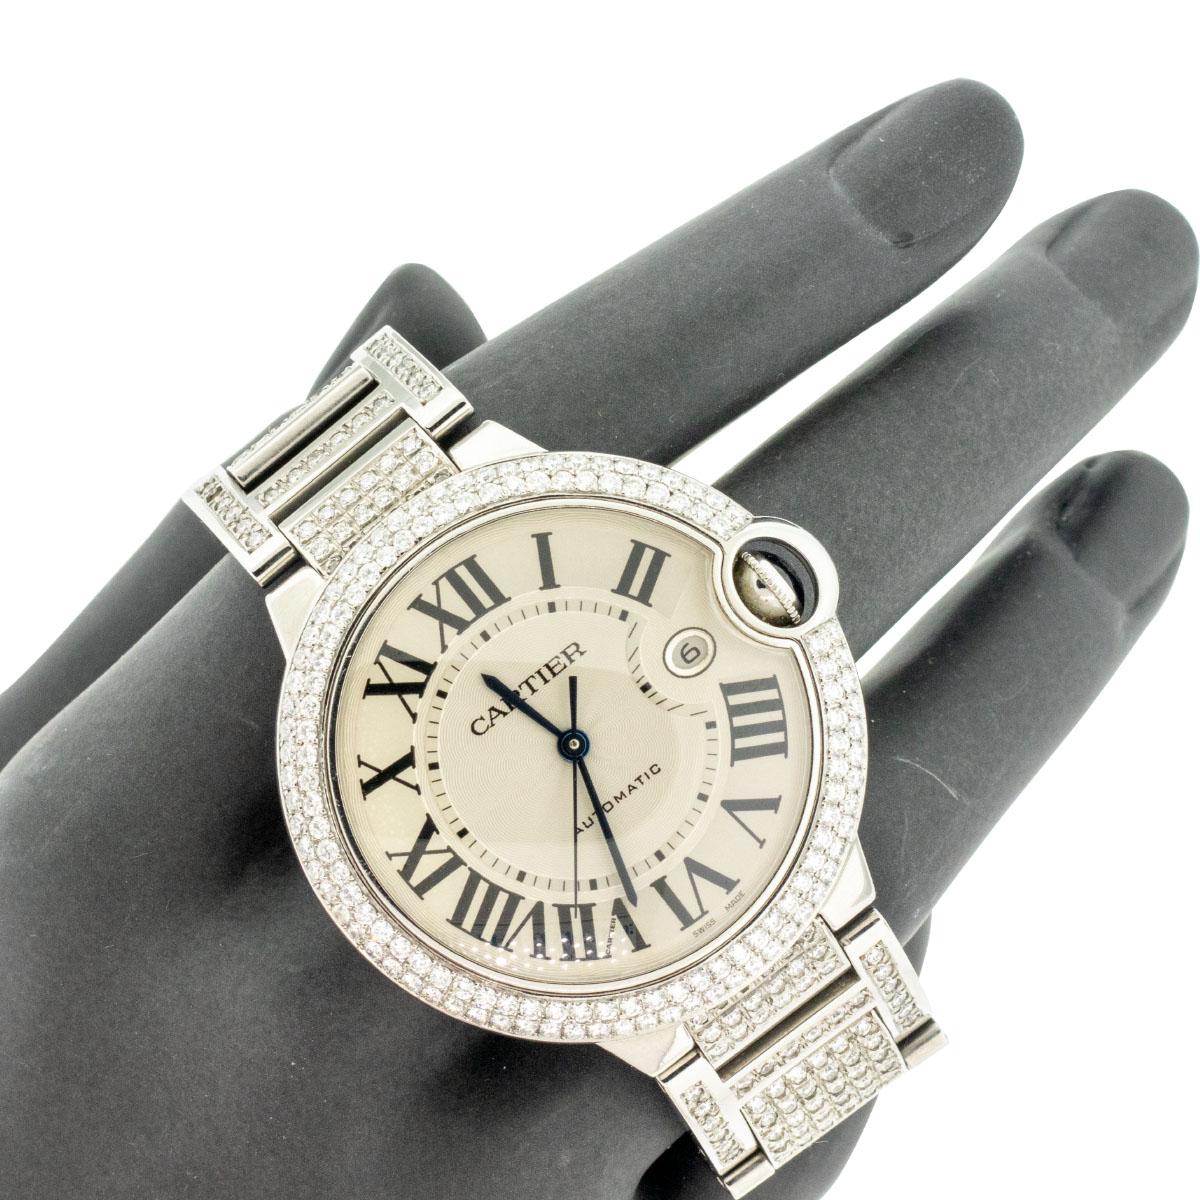 Cartier Ballon Bleu Stainless Steel Bust Down 42mm Watch w/ AM Diamonds

When it comes to luxury watches, Cartier has long been synonymous with elegance and timeless style. The Cartier Ballon Bleu Stainless Steel Bust Down 42mm Watch is a true